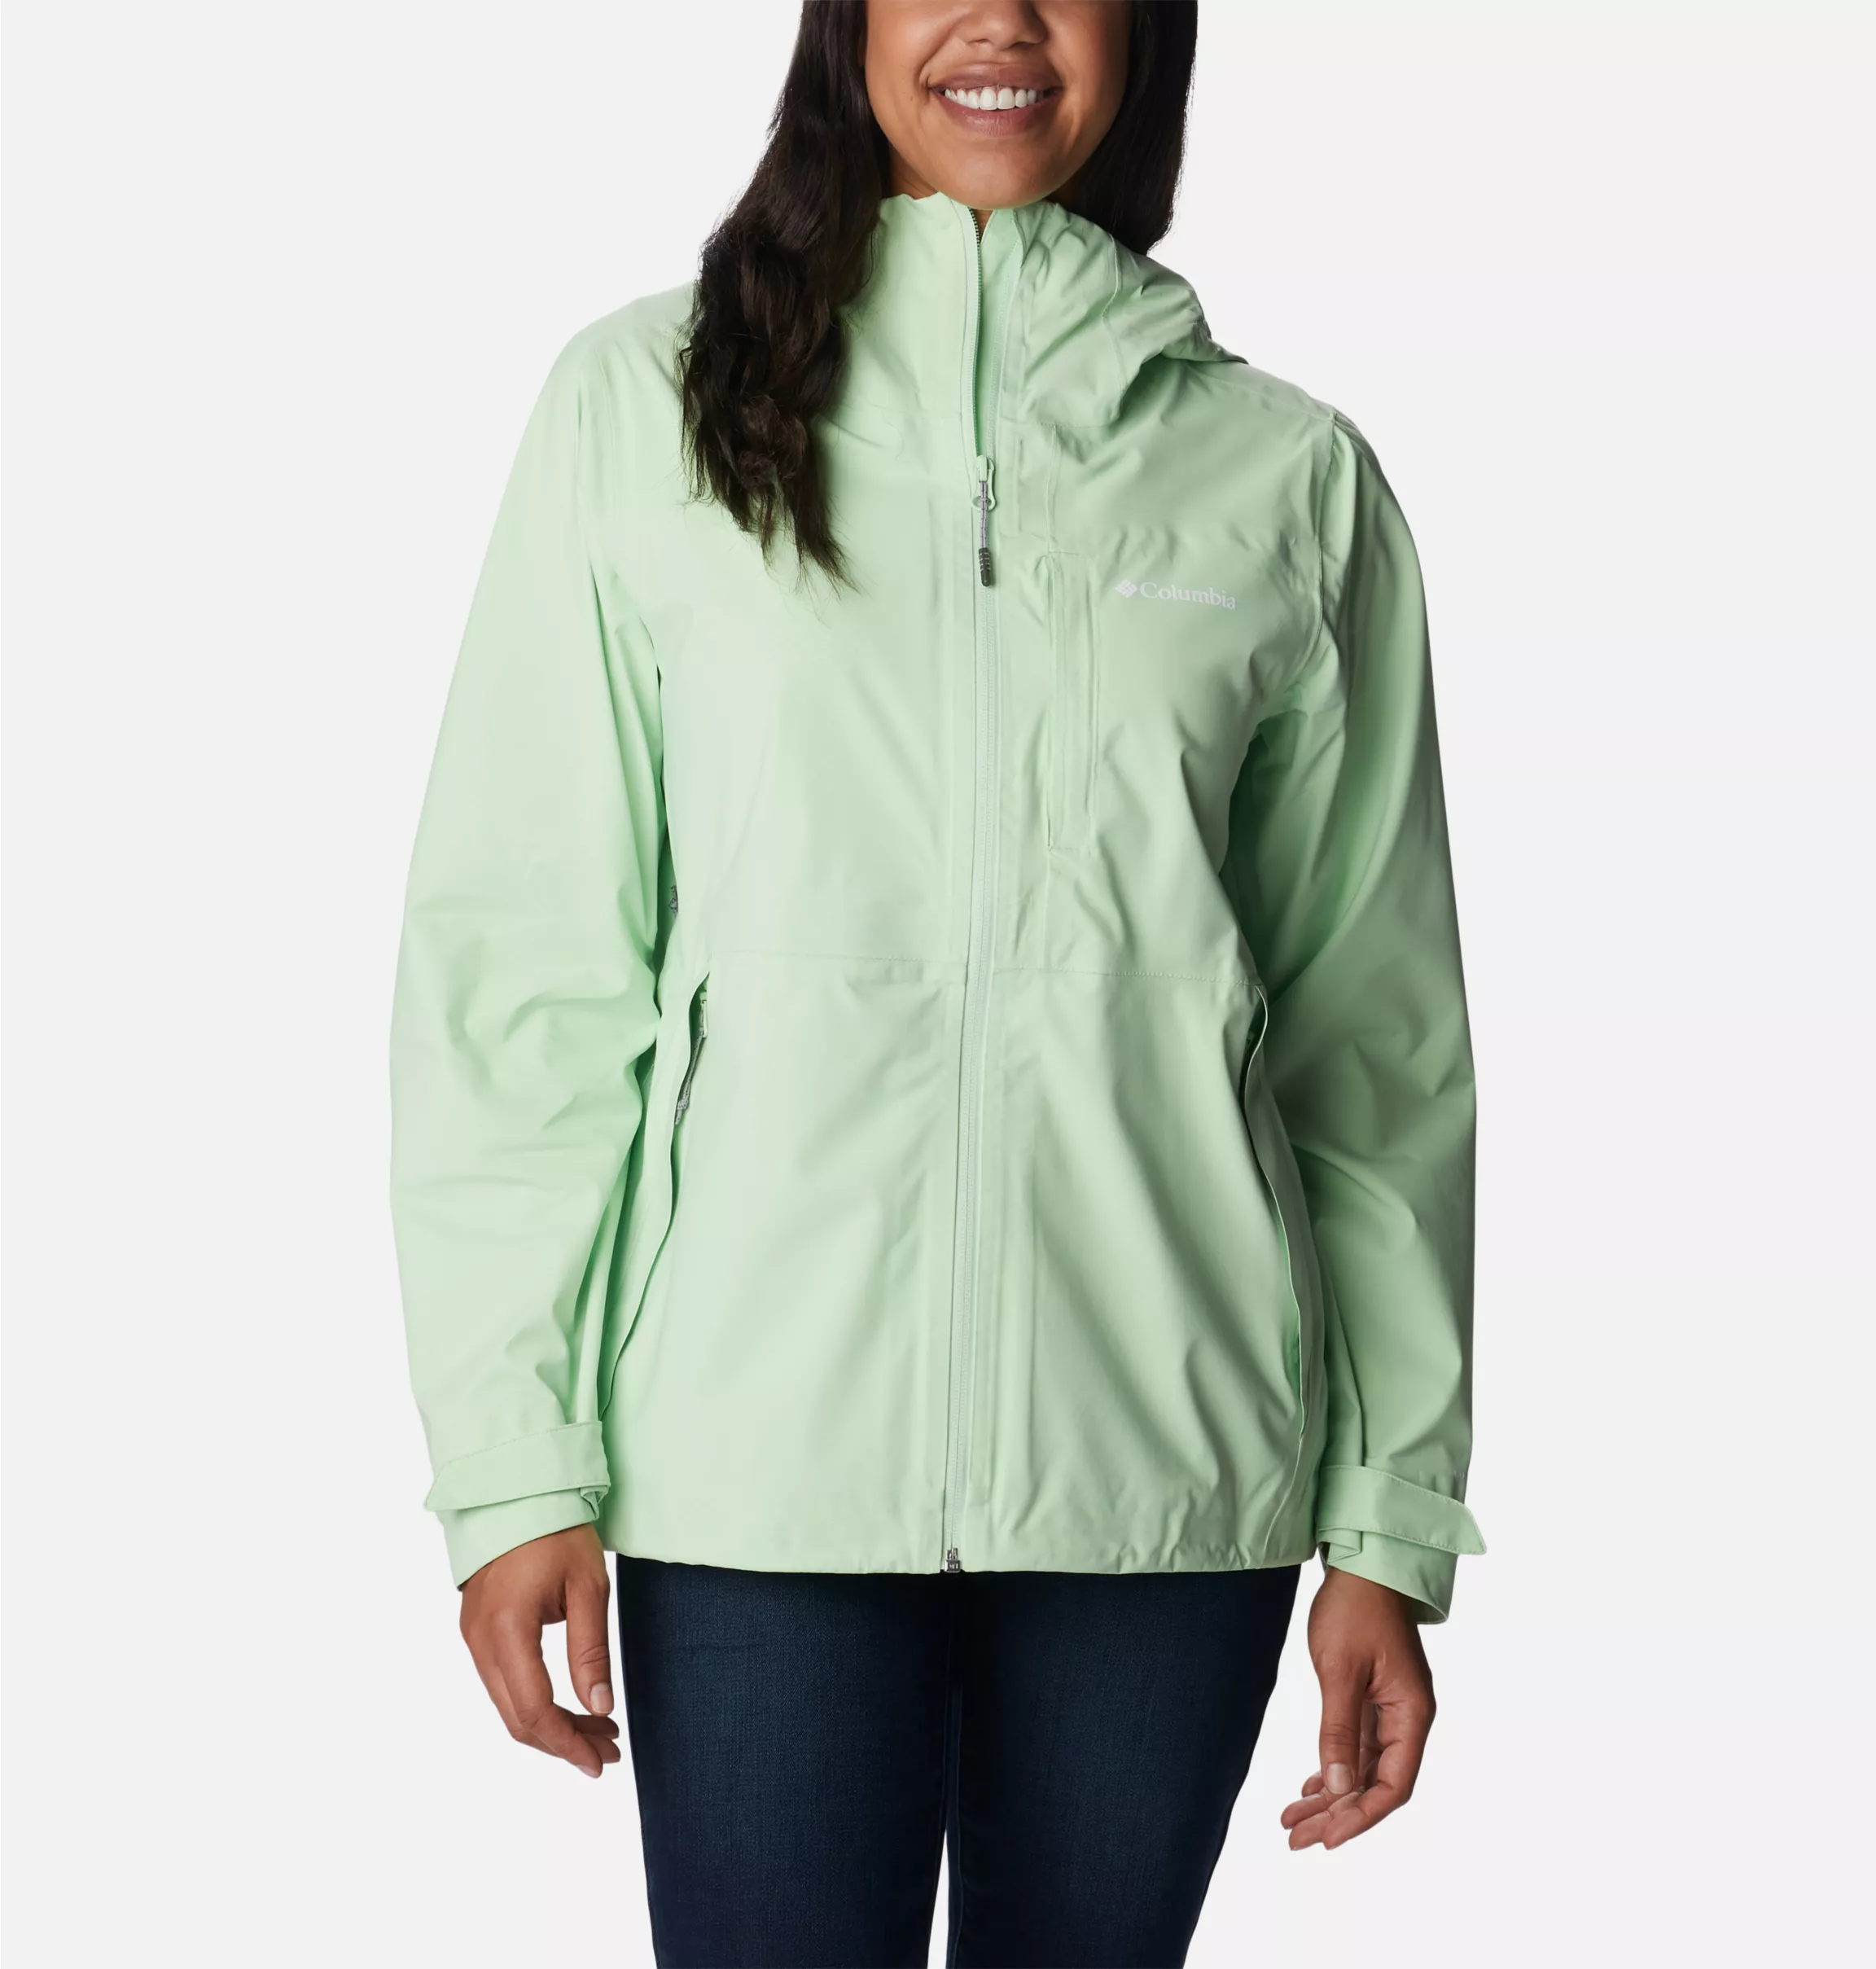 Chaqueta Columbia Shell impermeable Ampli-Dry™ para mujer